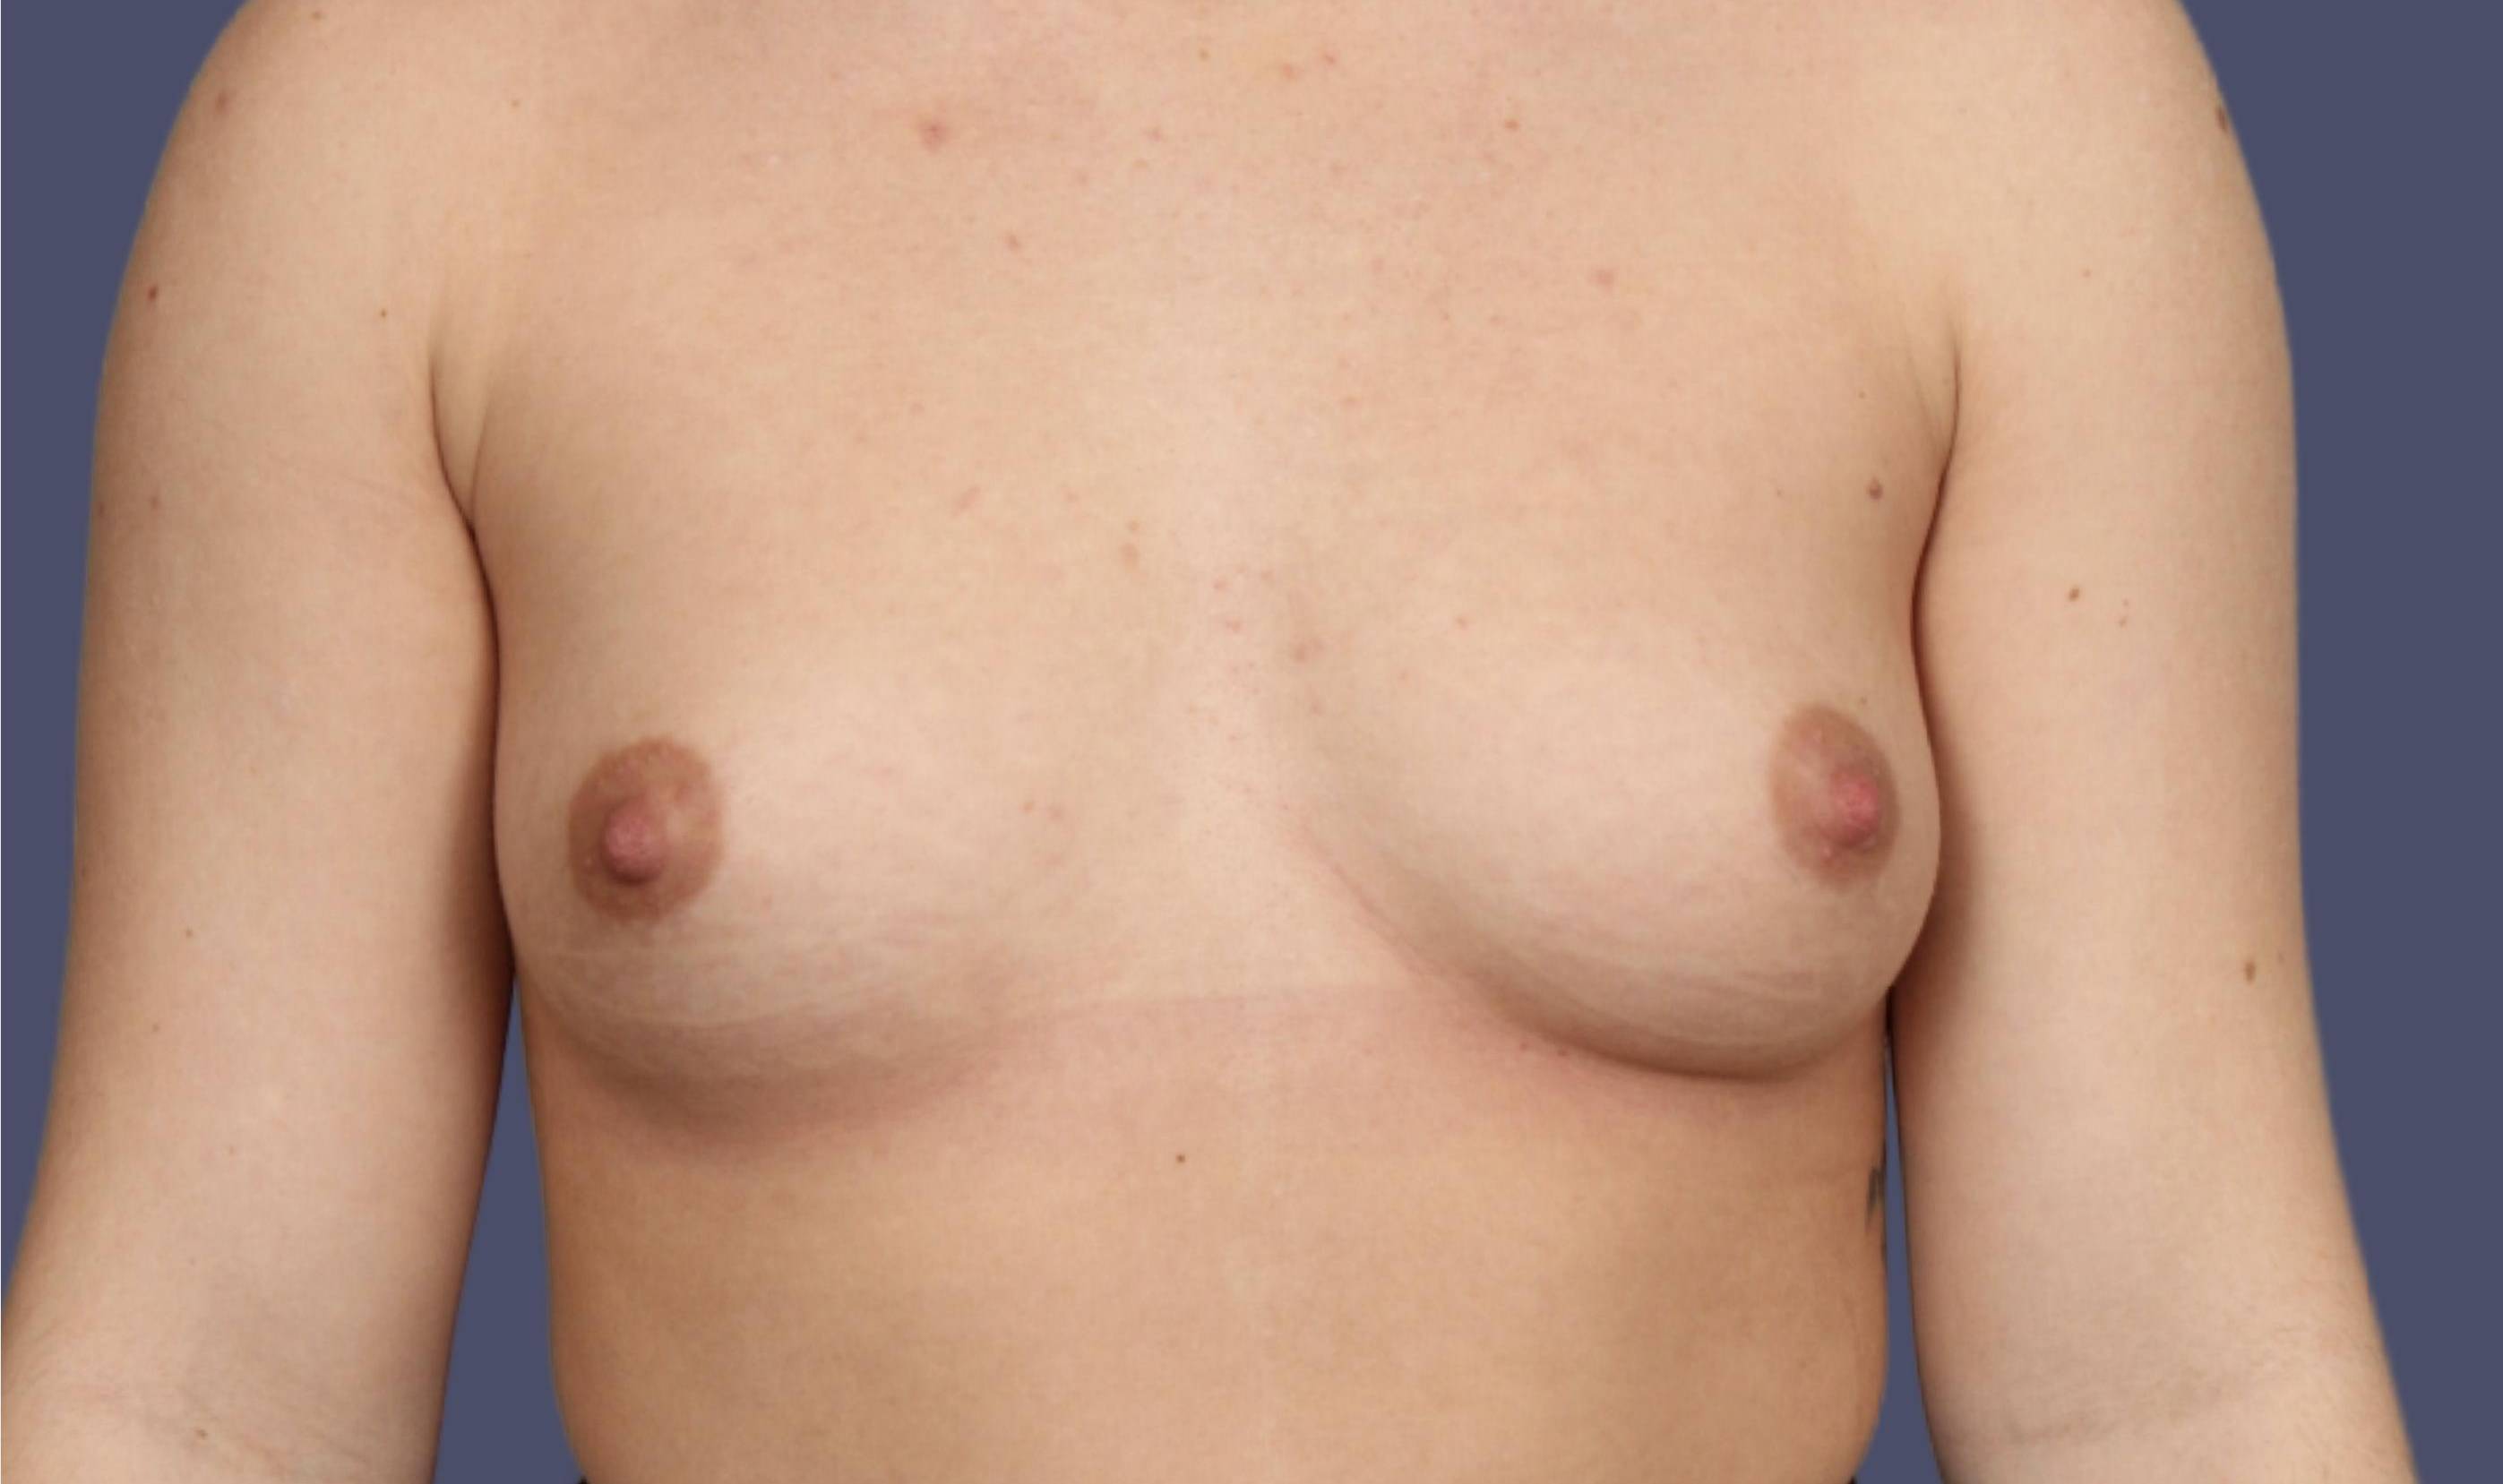 Breast Augmentation 32 Before